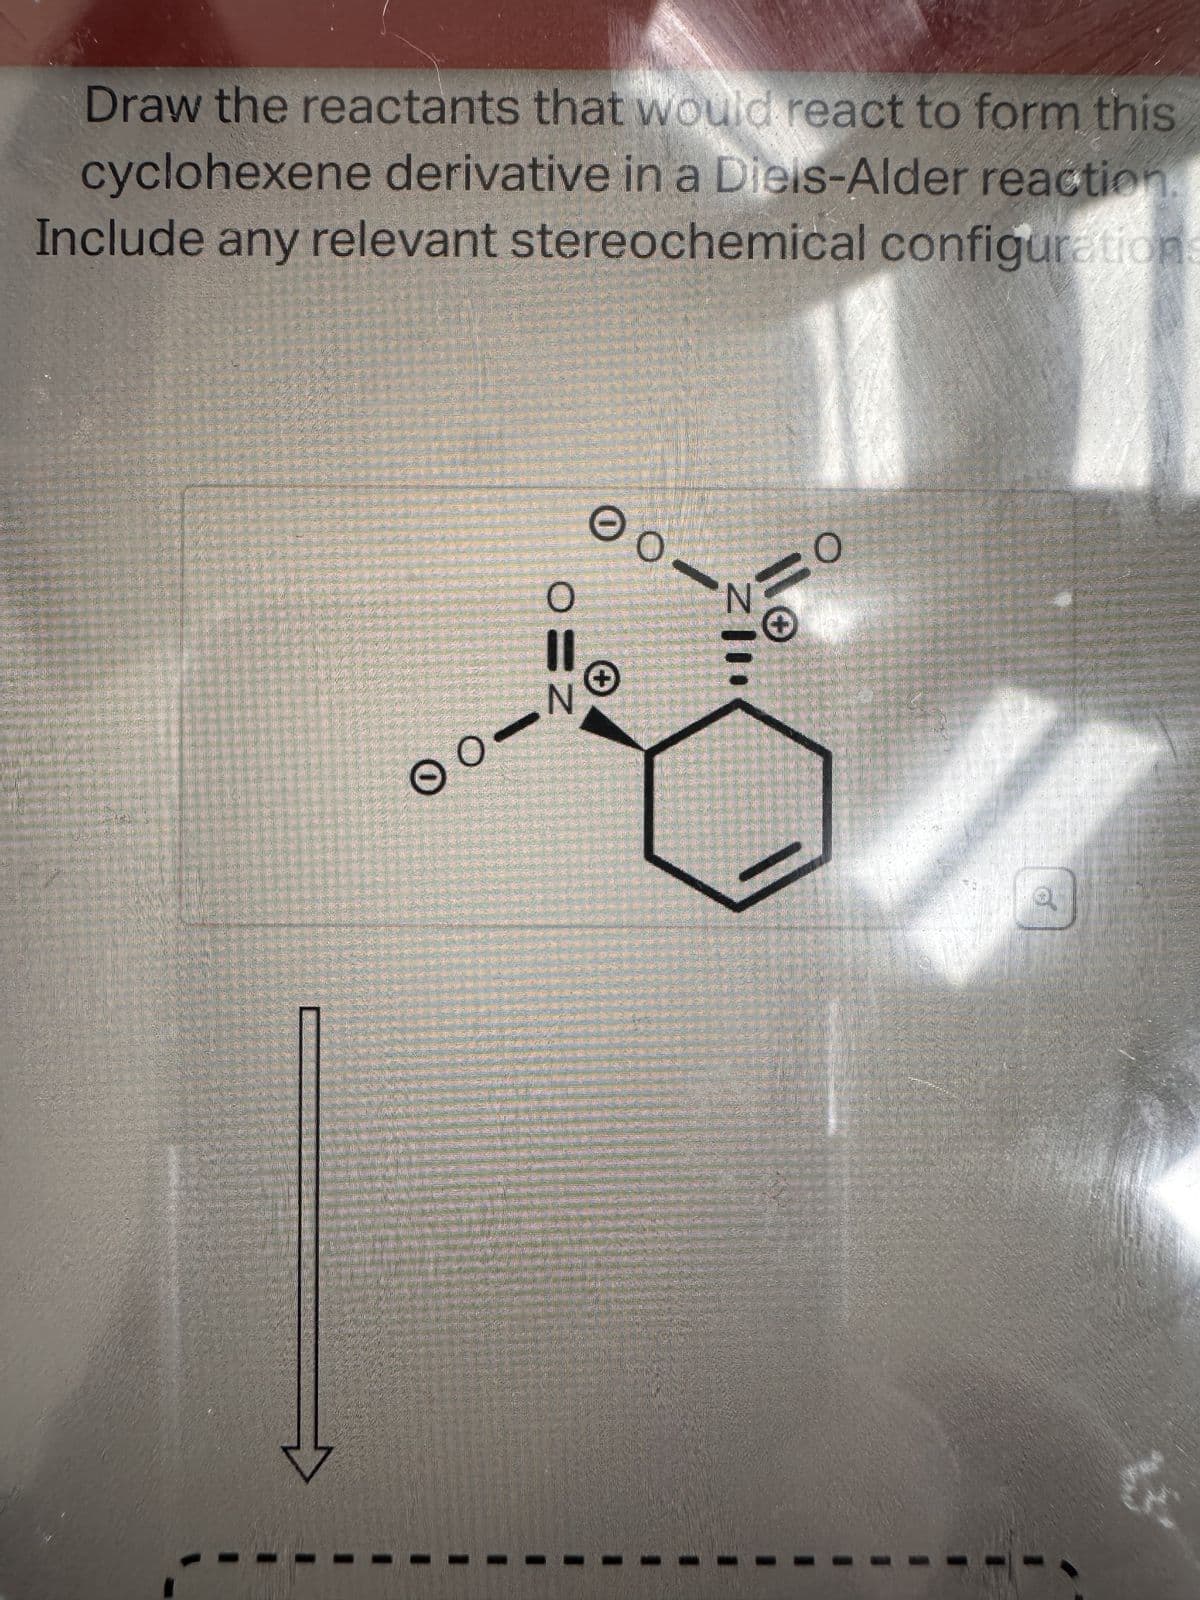 Draw the reactants that would react to form this
cyclohexene derivative in a Diels-Alder reaction.
Include any relevant stereochemical configurations
REZU
SO WARTO
HA PETI
O O
OMN
0
O
N
O
2